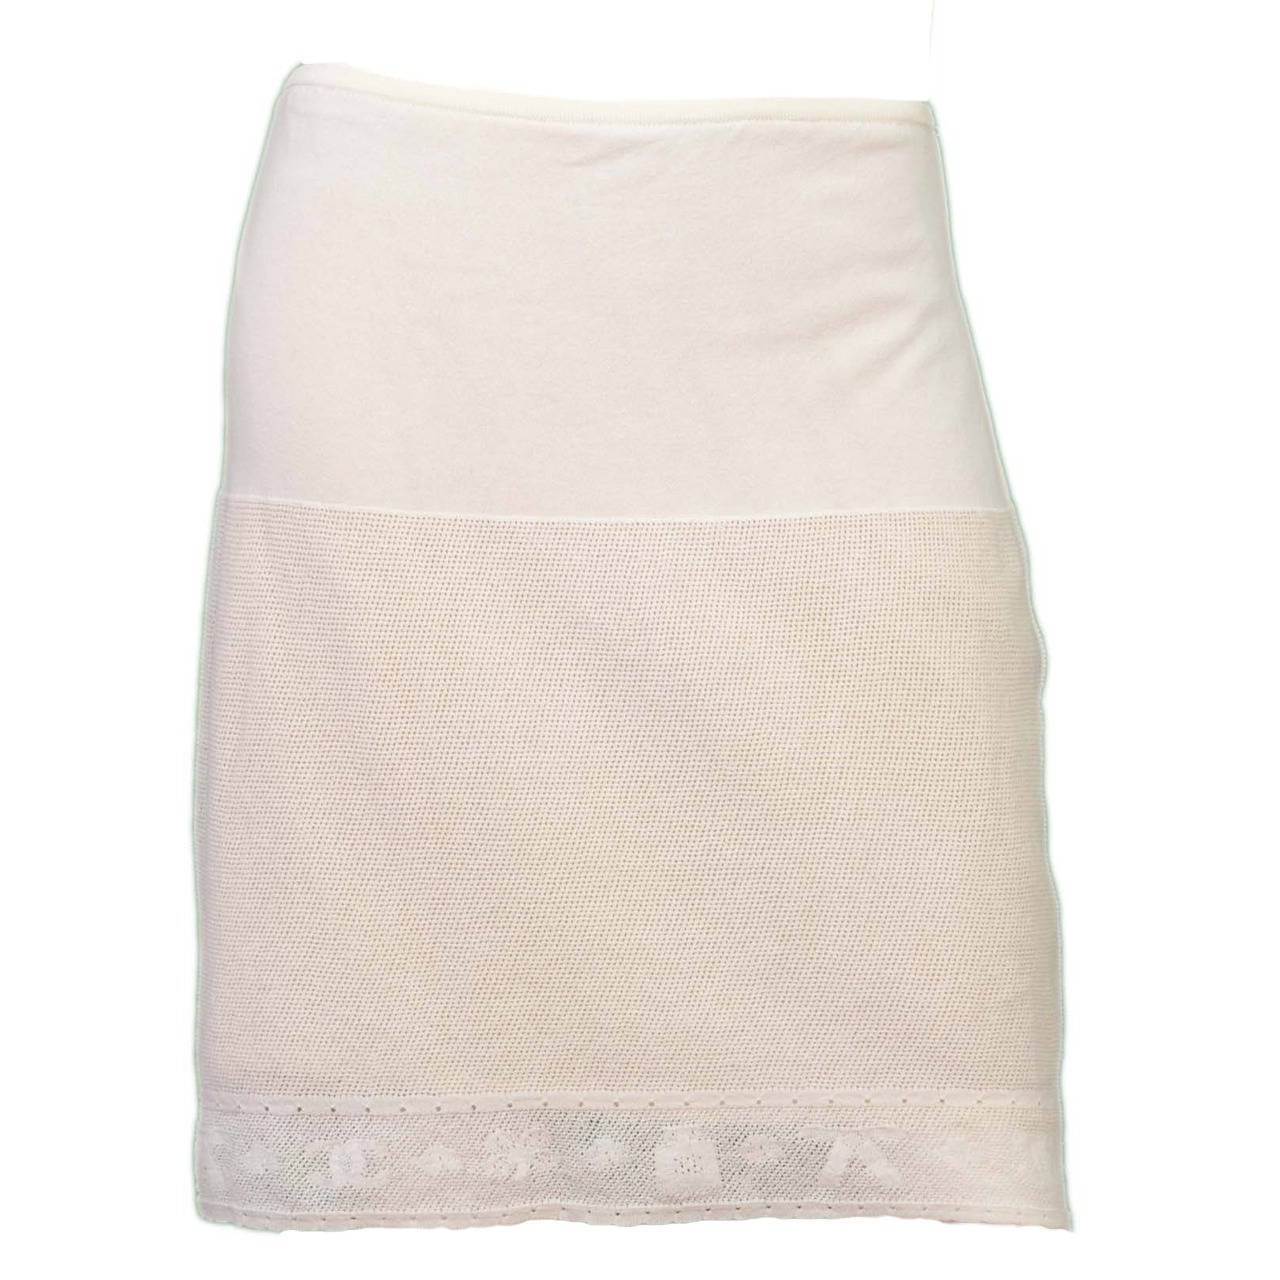 CHANEL 2003 White Perforated Stretch Skirt sz 38